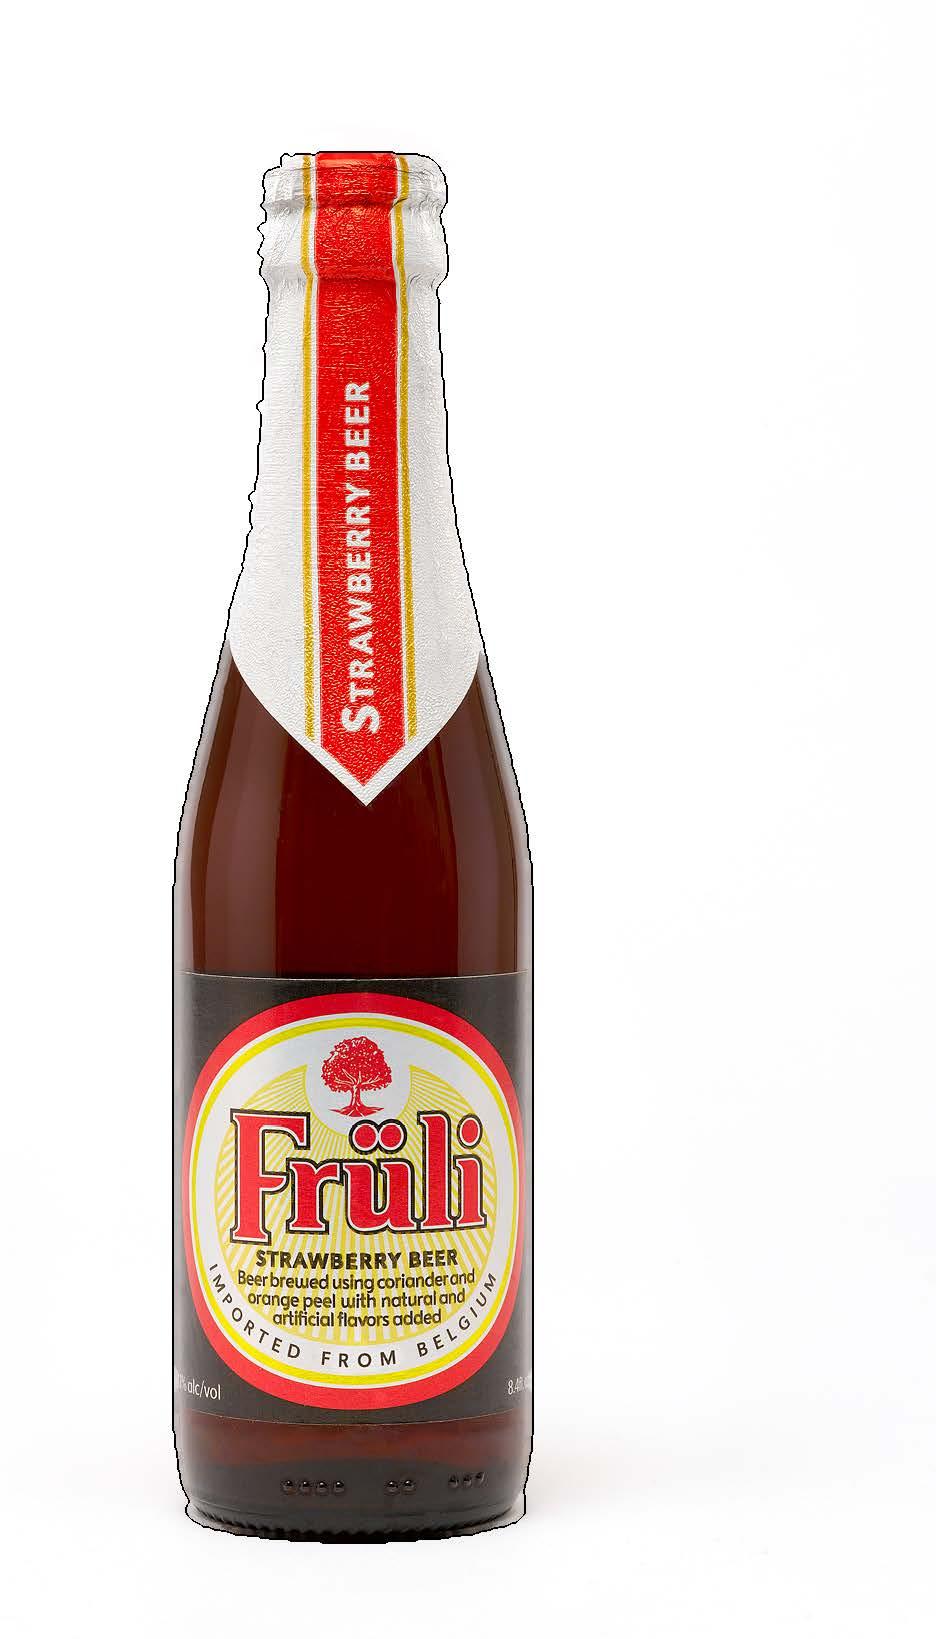 Belgian Strawberry White (Wheat) Beer fermented with